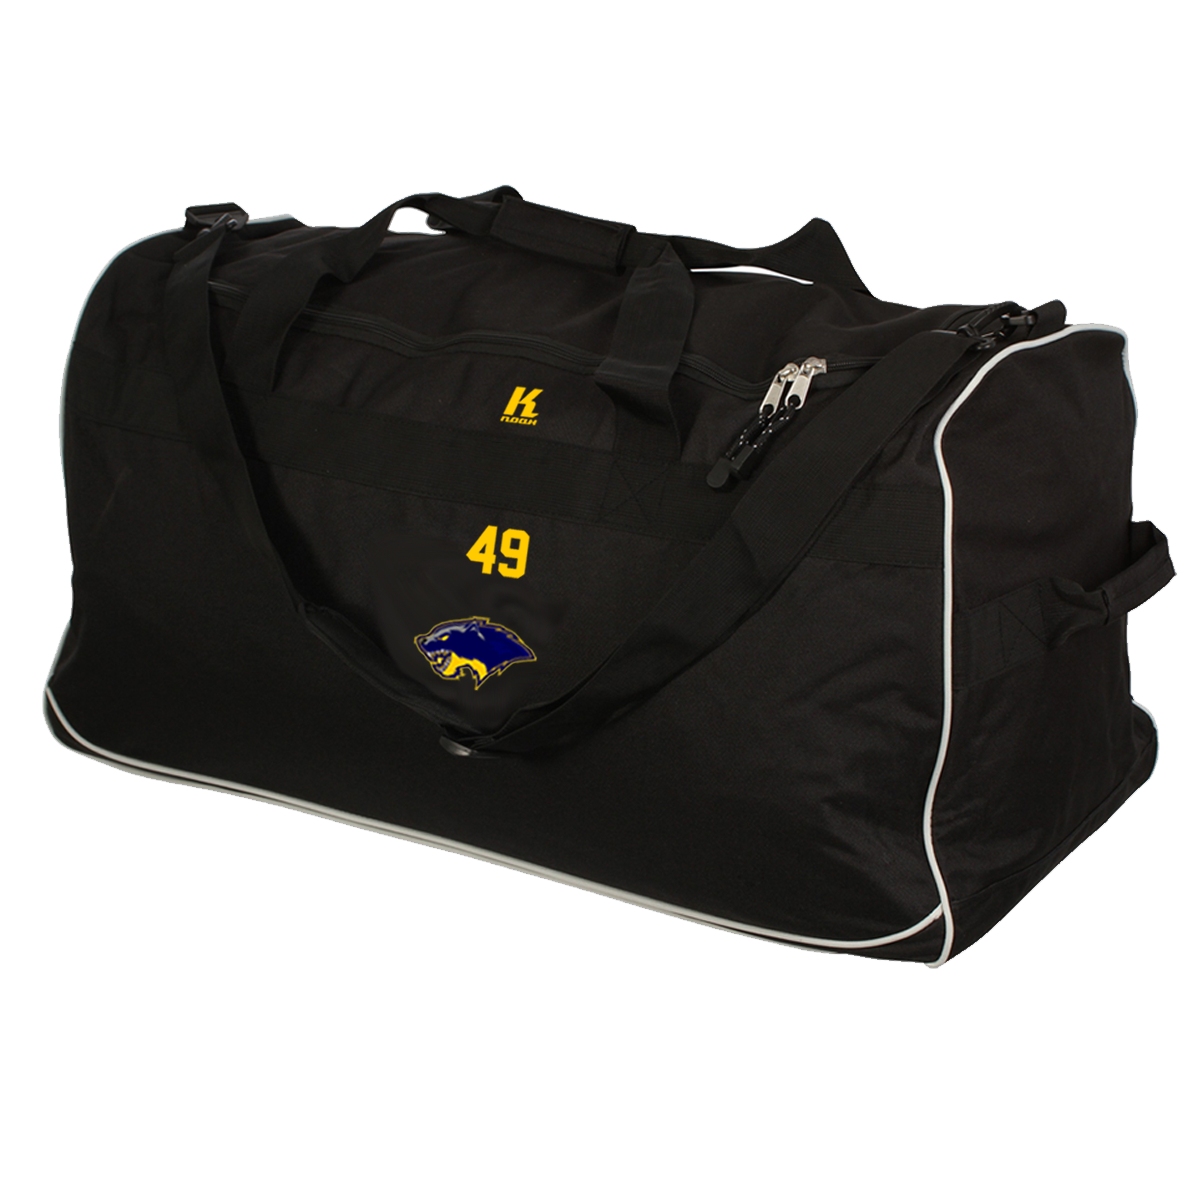 Wolverines Jumbo Team Kitbag with Playernumber or Initials